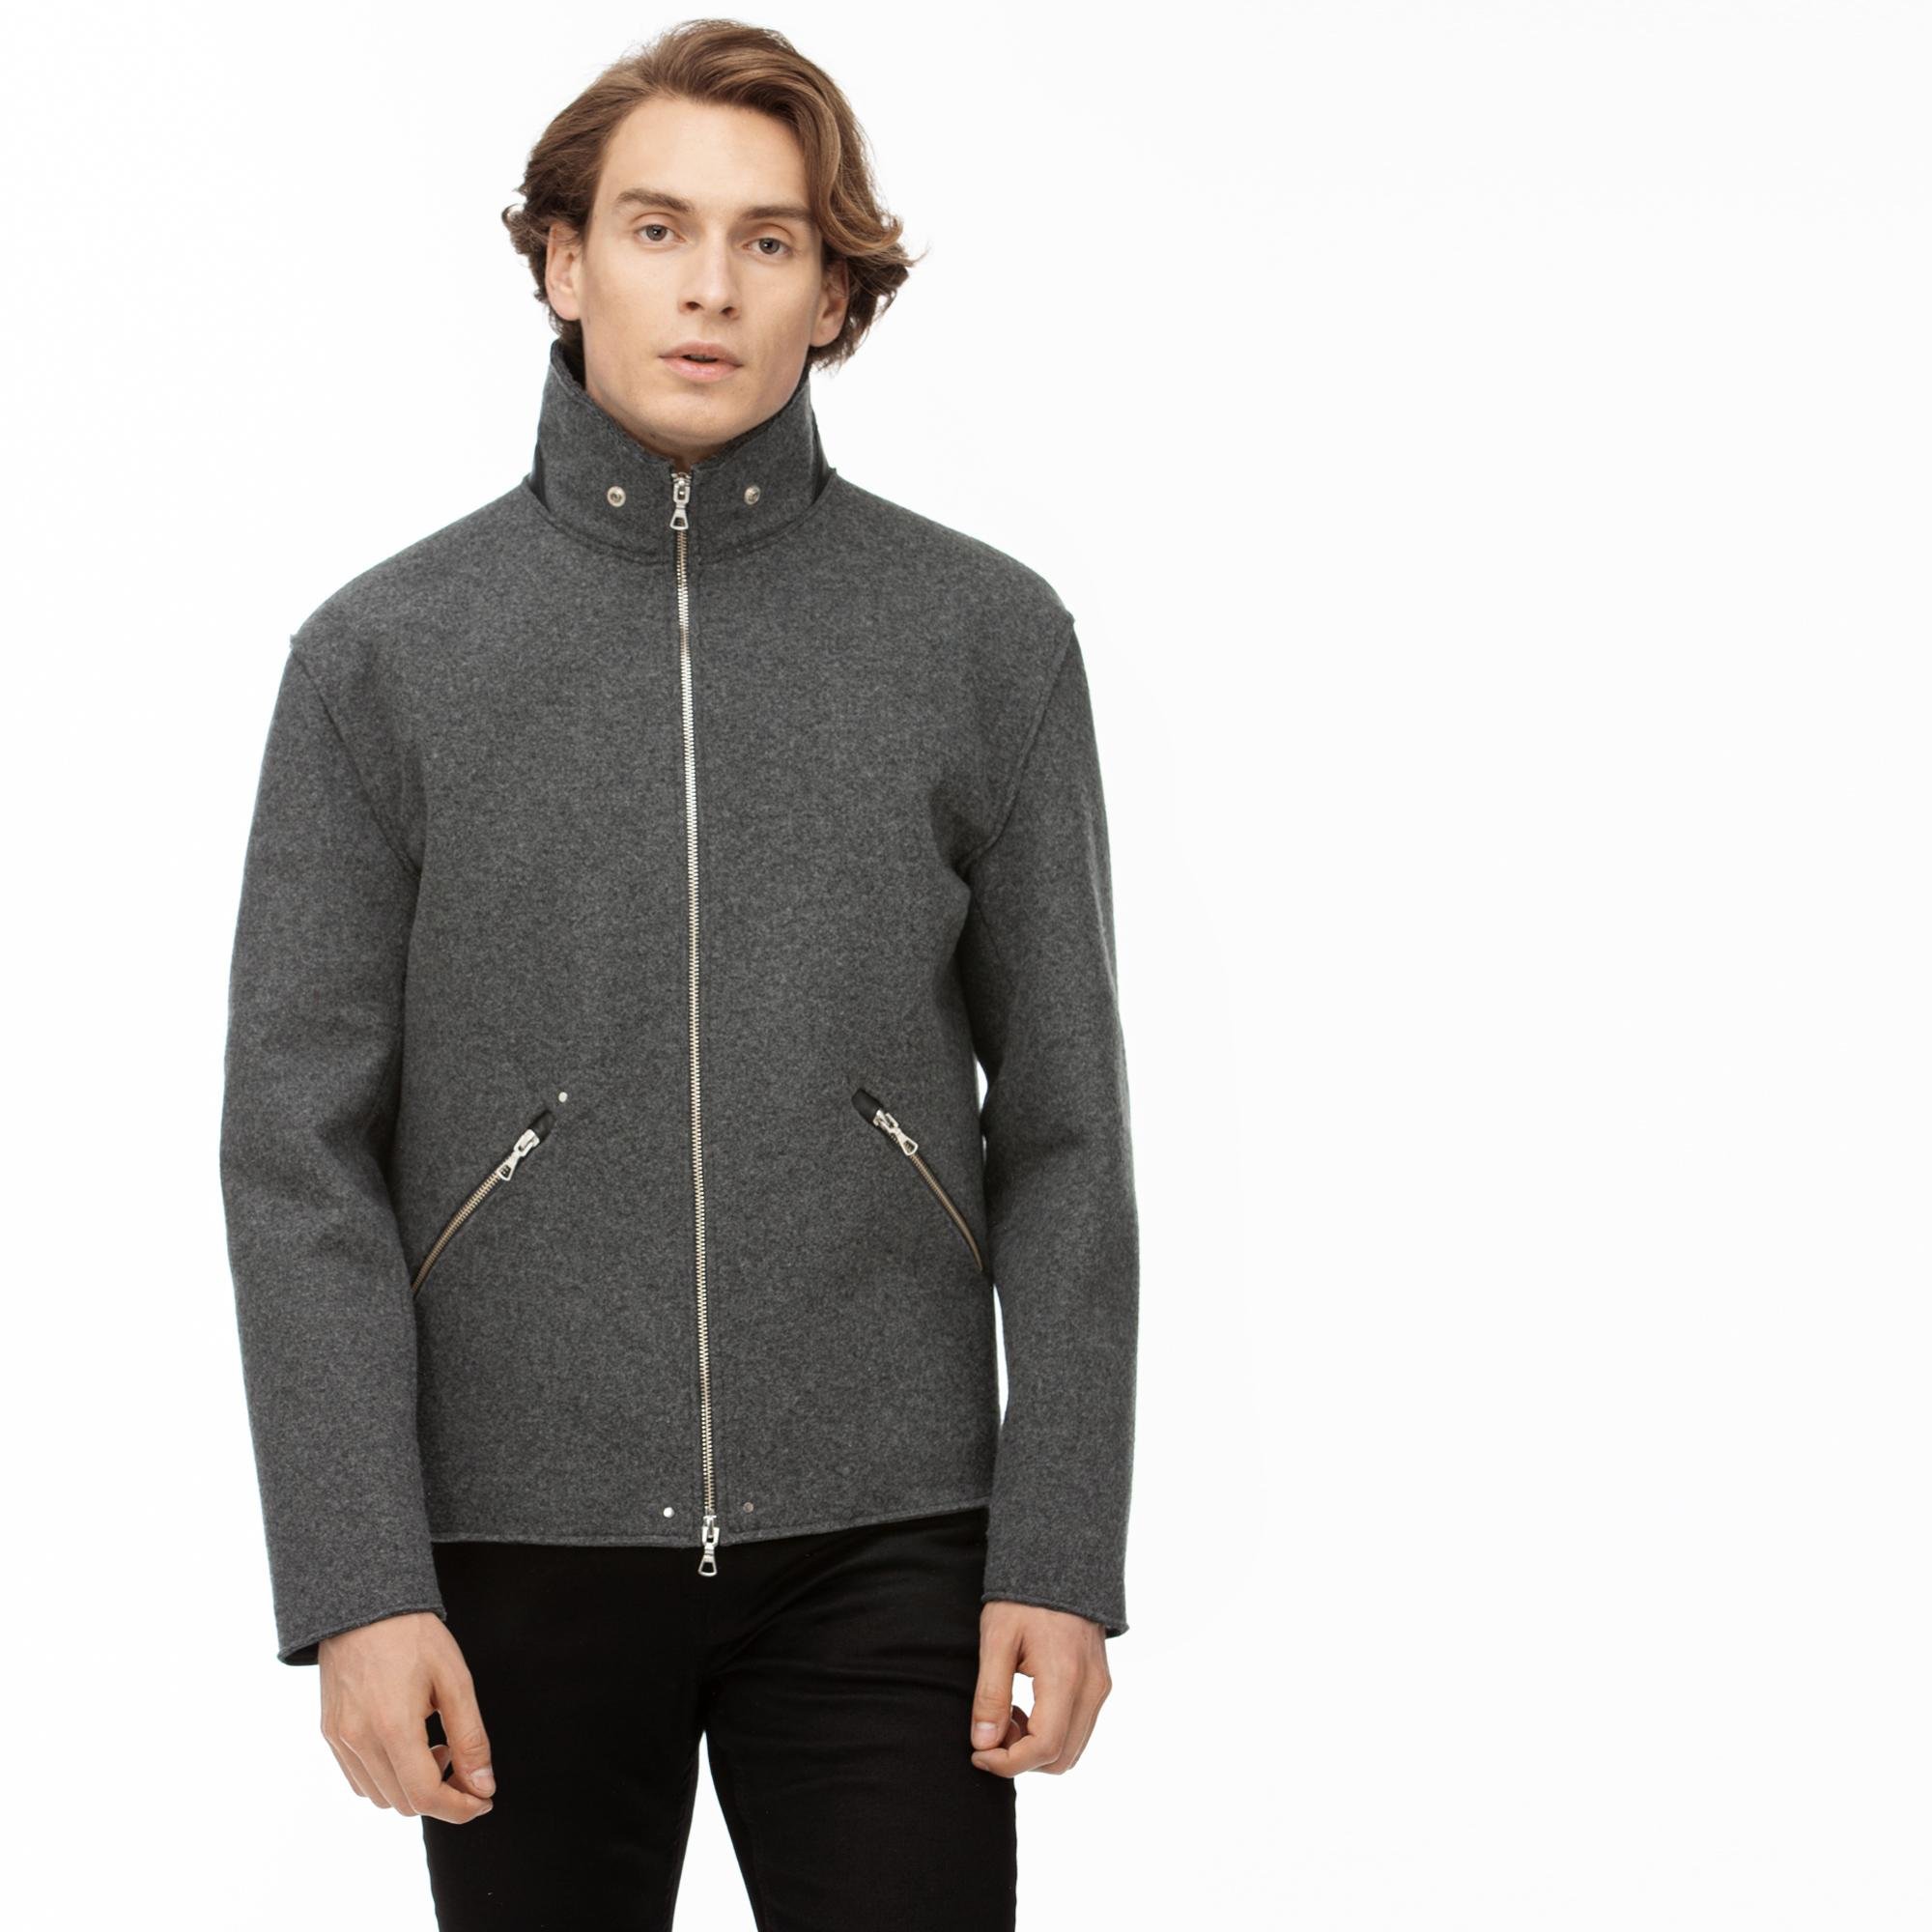 Lacoste Men's Premium Wool And Leather Accent Zip Jacket